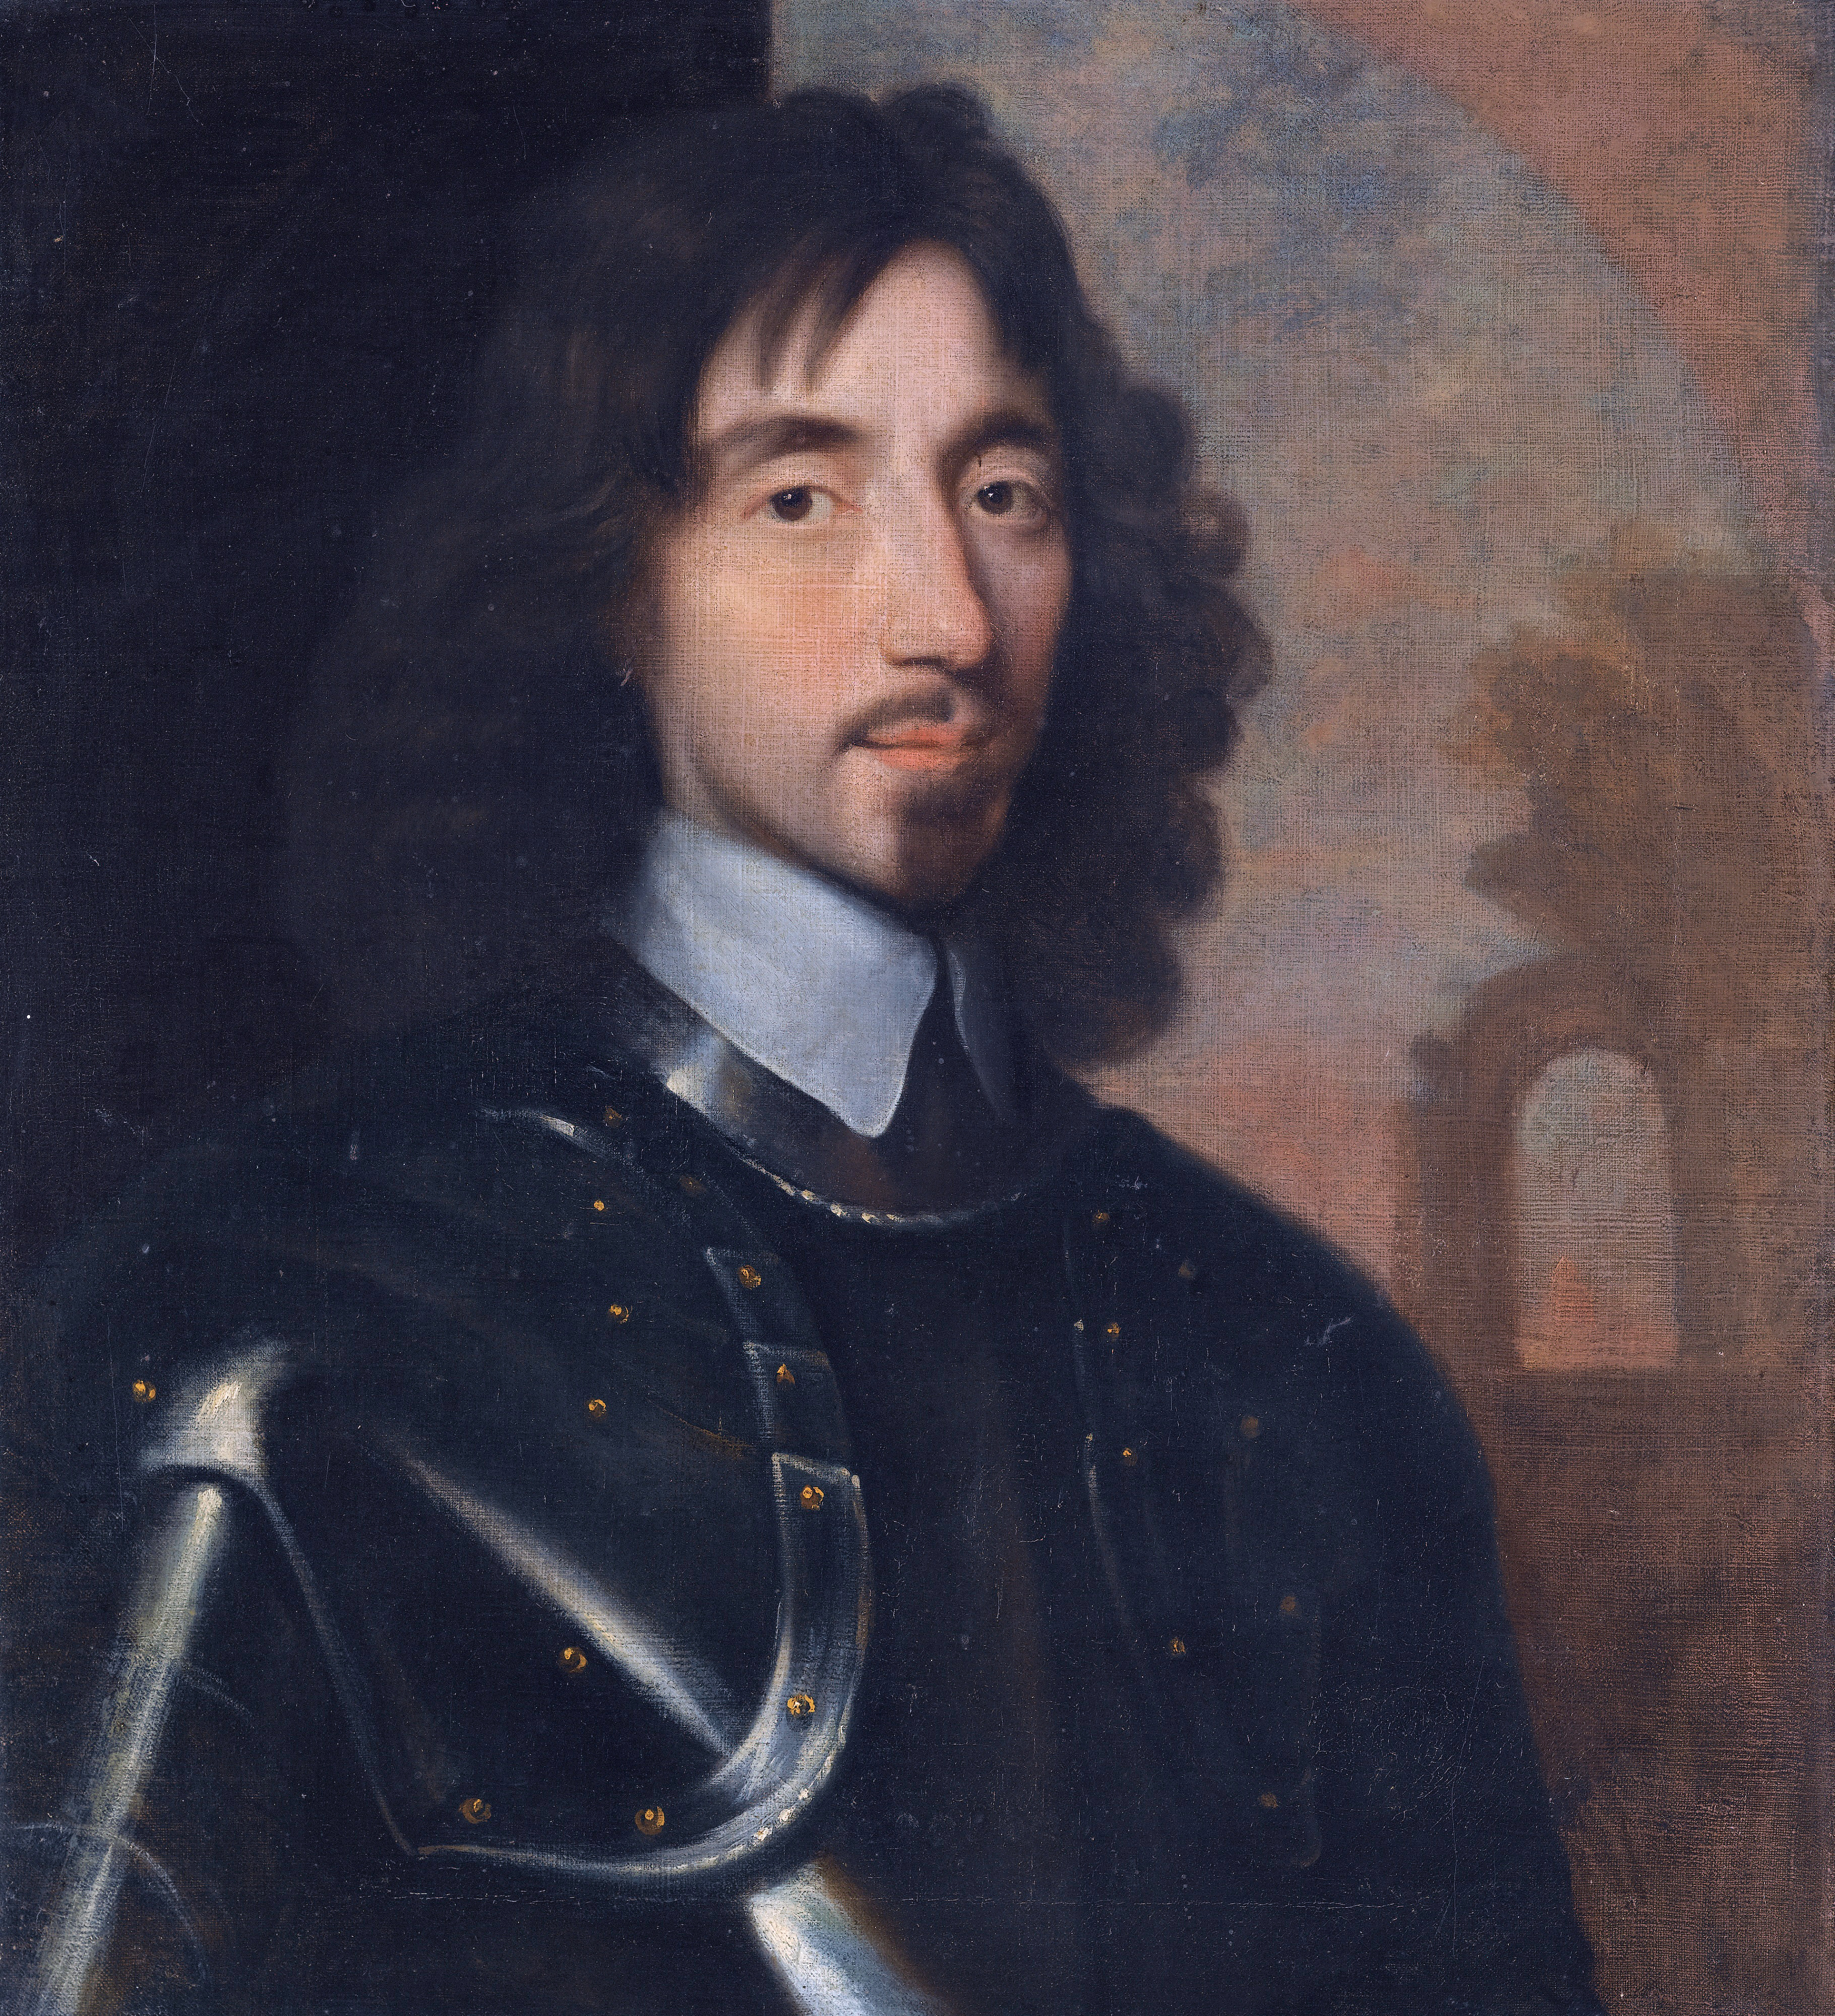 Thomas Fairfax, English general and politician (d. 1671) was born on January 17, 1612.